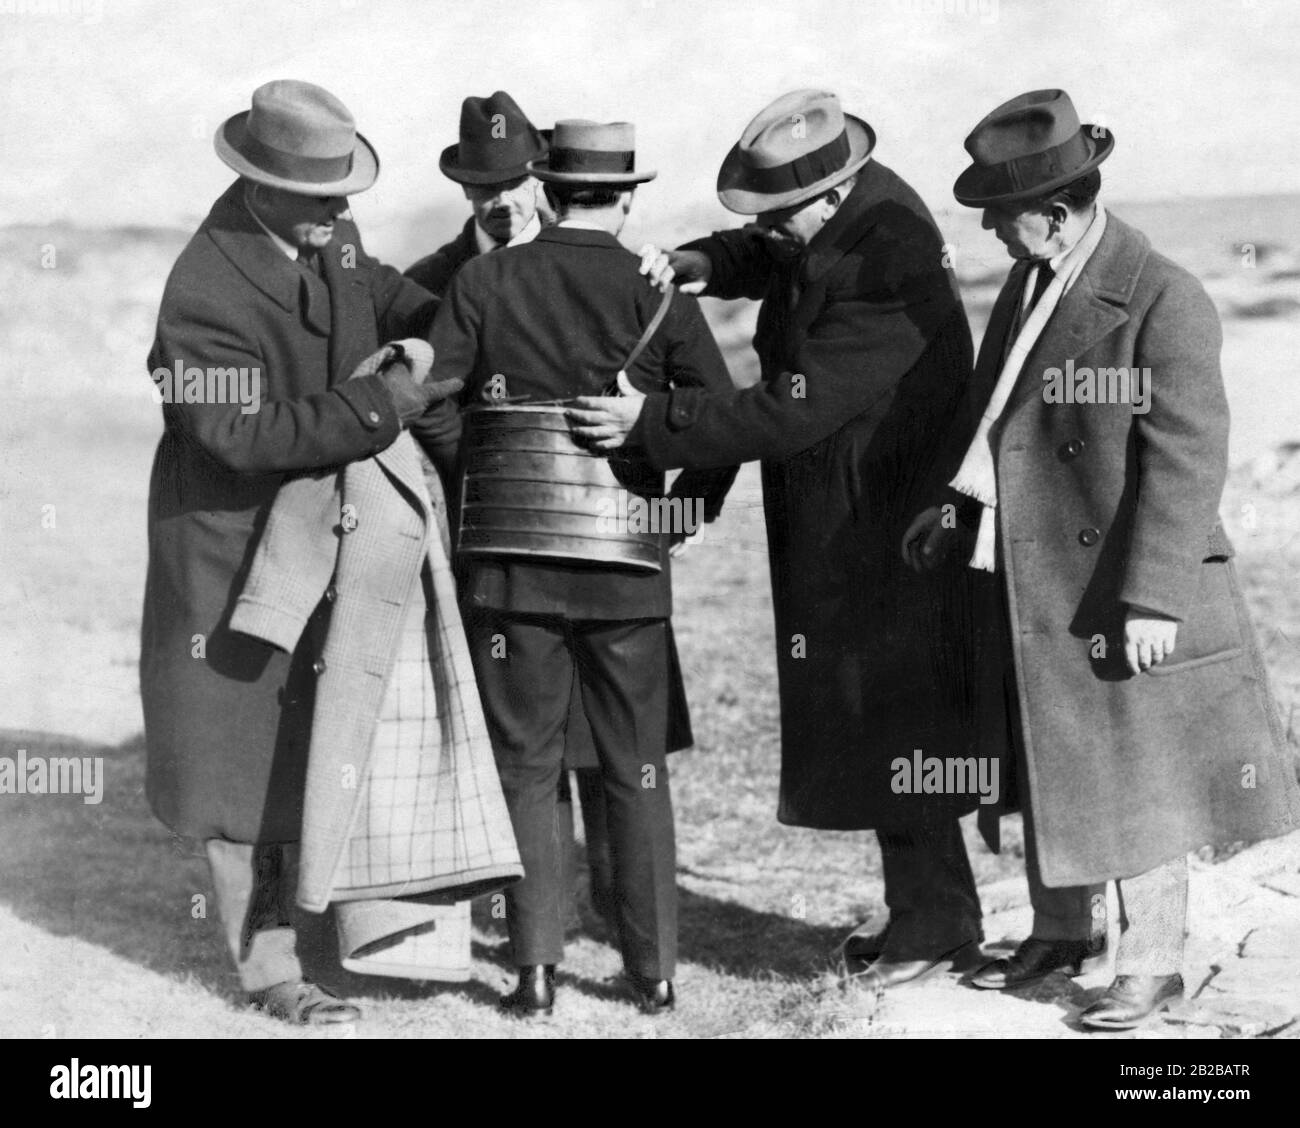 Prohibition: Picture shows a container built to bootleg alcohol under the jacket. Stock Photo